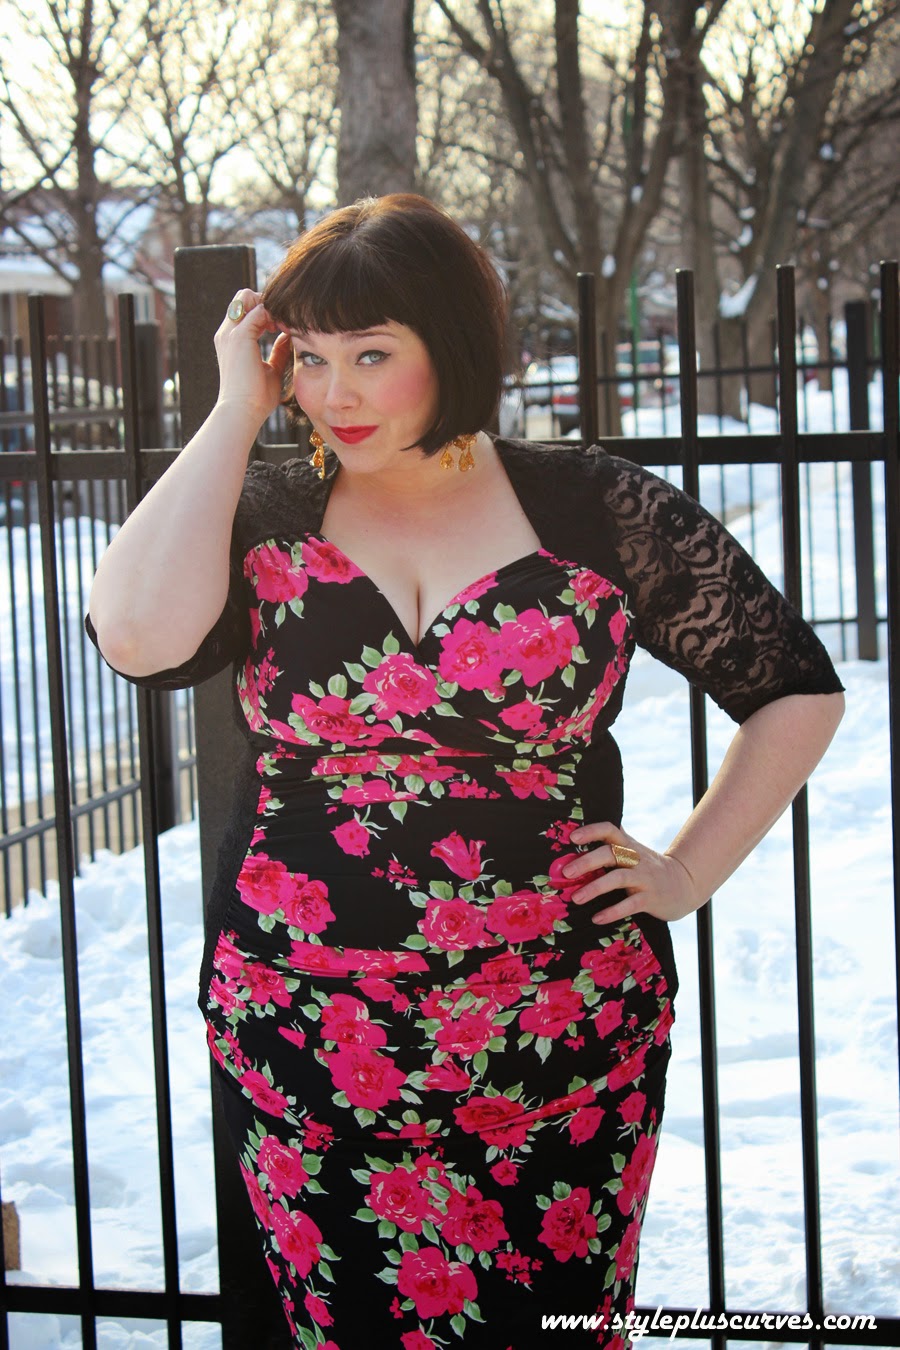 Plus and Lace Dress From Kiyonna is VaVa-Voom!